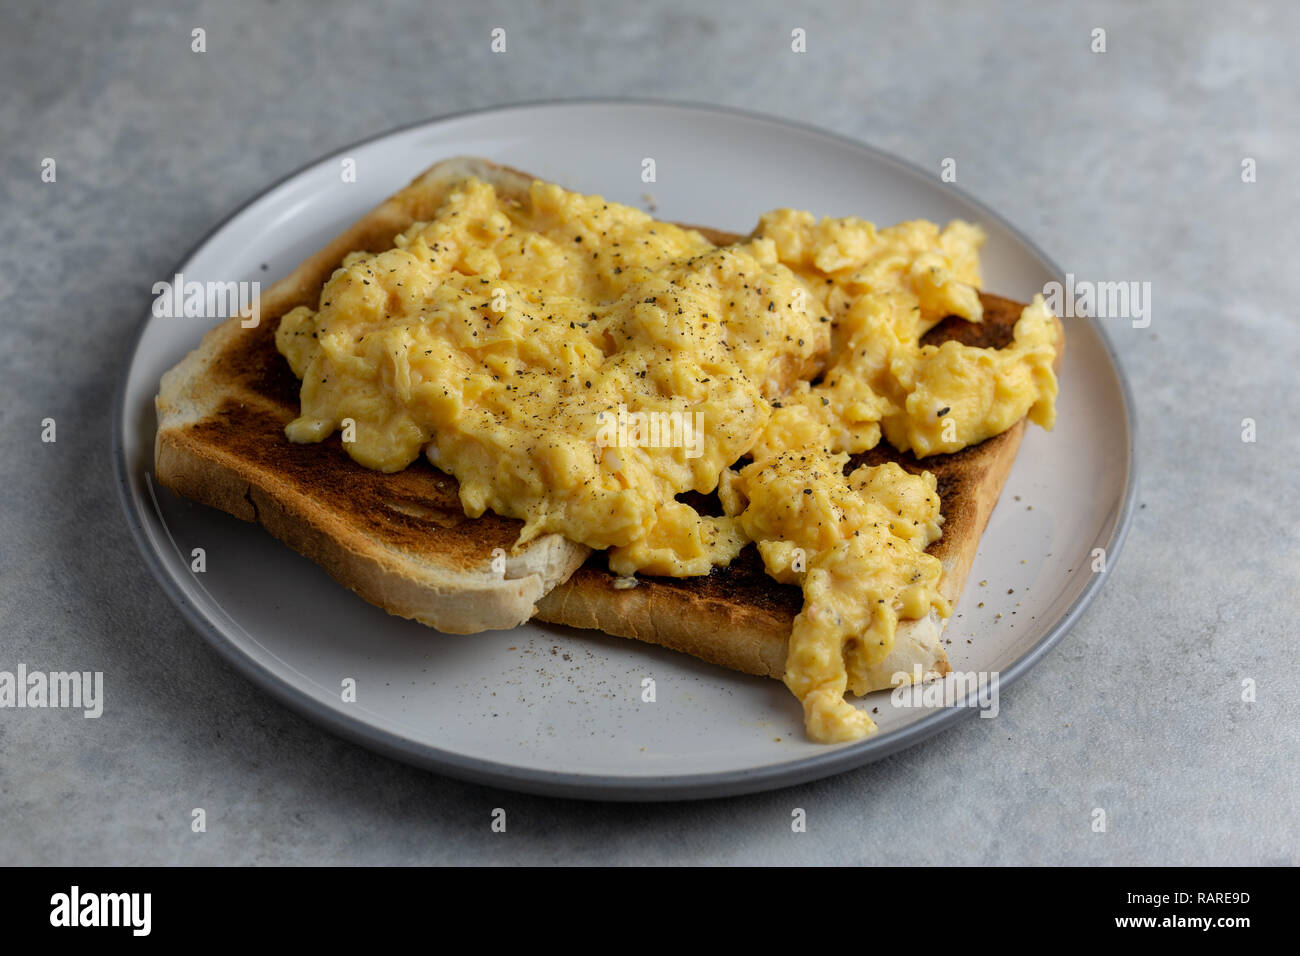 Scrambled eggs with black pepper on two pieces of toast on a white plate with a grey rim on a simple grey and white marbled background Stock Photo